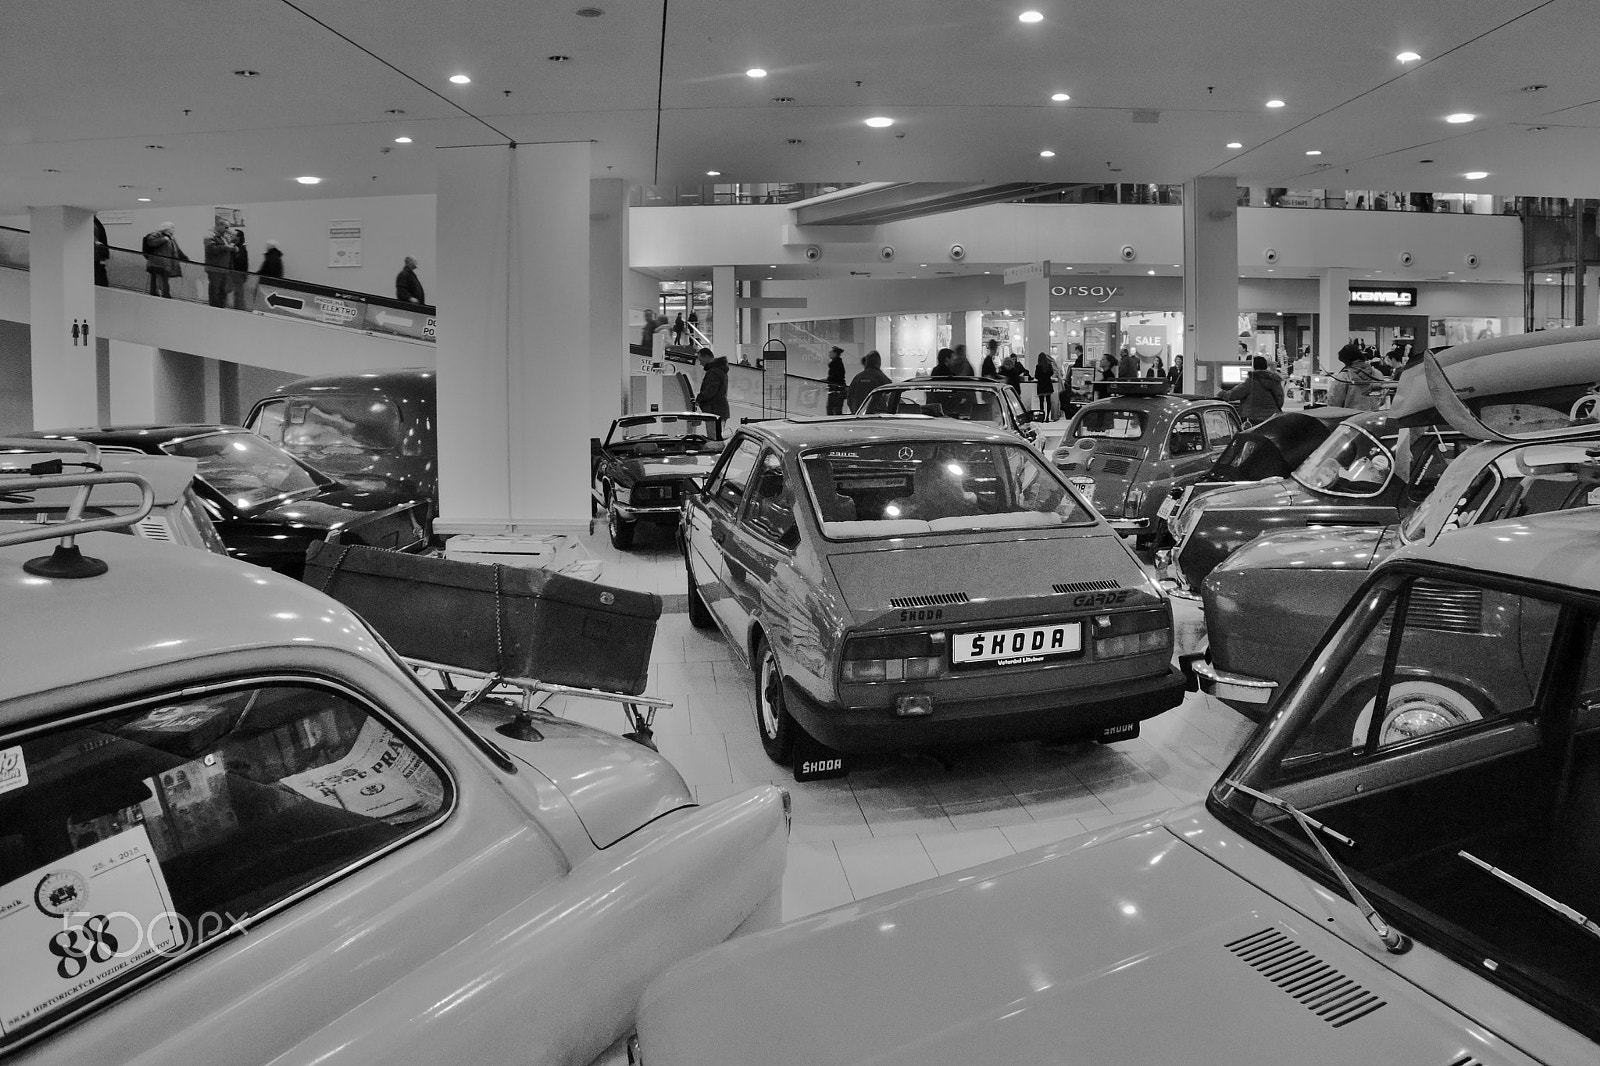 Nikon Coolpix P6000 sample photo. Most, czech republic - march 18, 2017: skoda garde of 1983 in department store photography